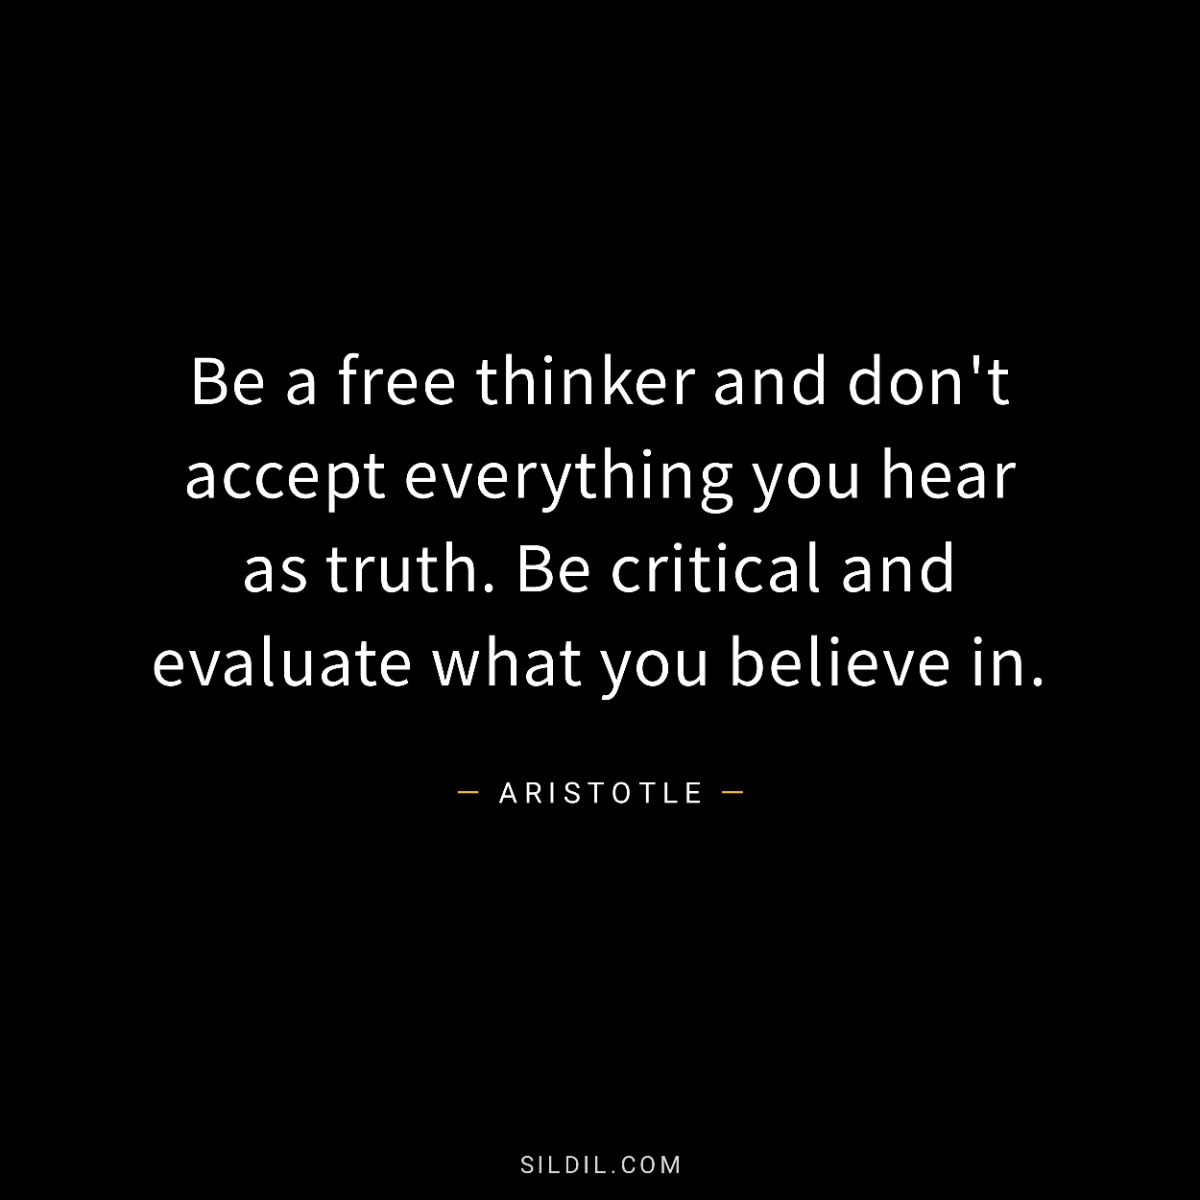 Be a free thinker and don't accept everything you hear as truth. Be critical and evaluate what you believe in.